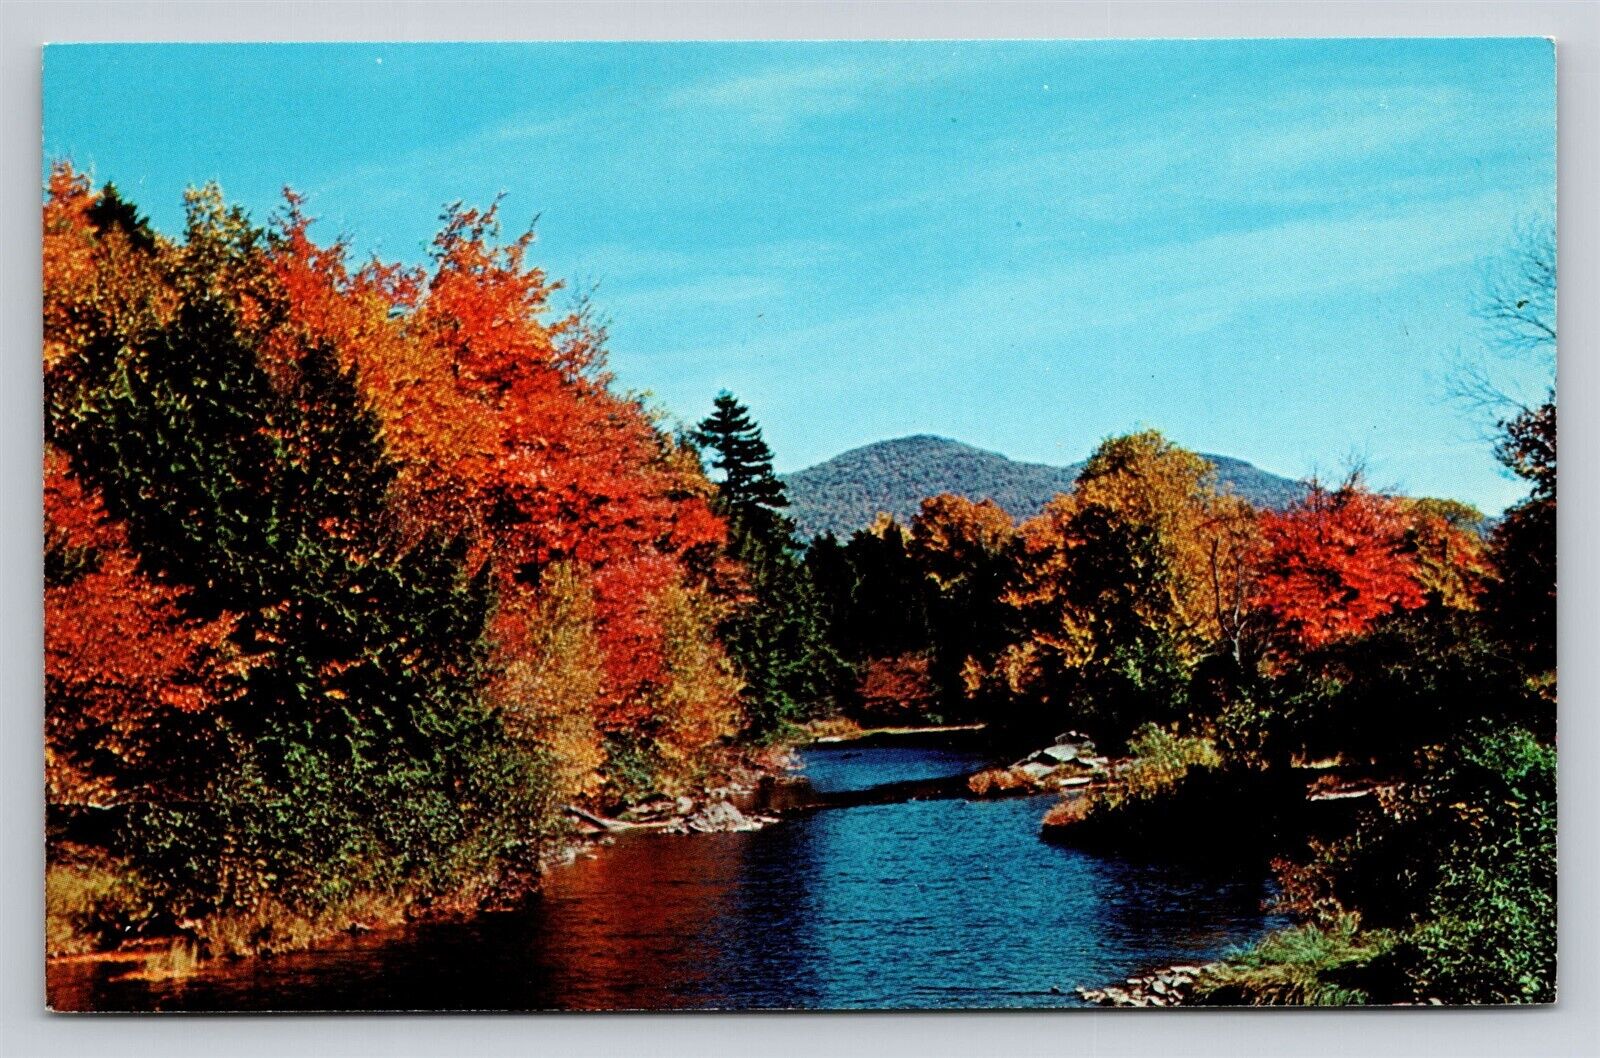 Schoharie Creek New York in Fall Autumn Colors Leaves Glory Vintage NY Postcard